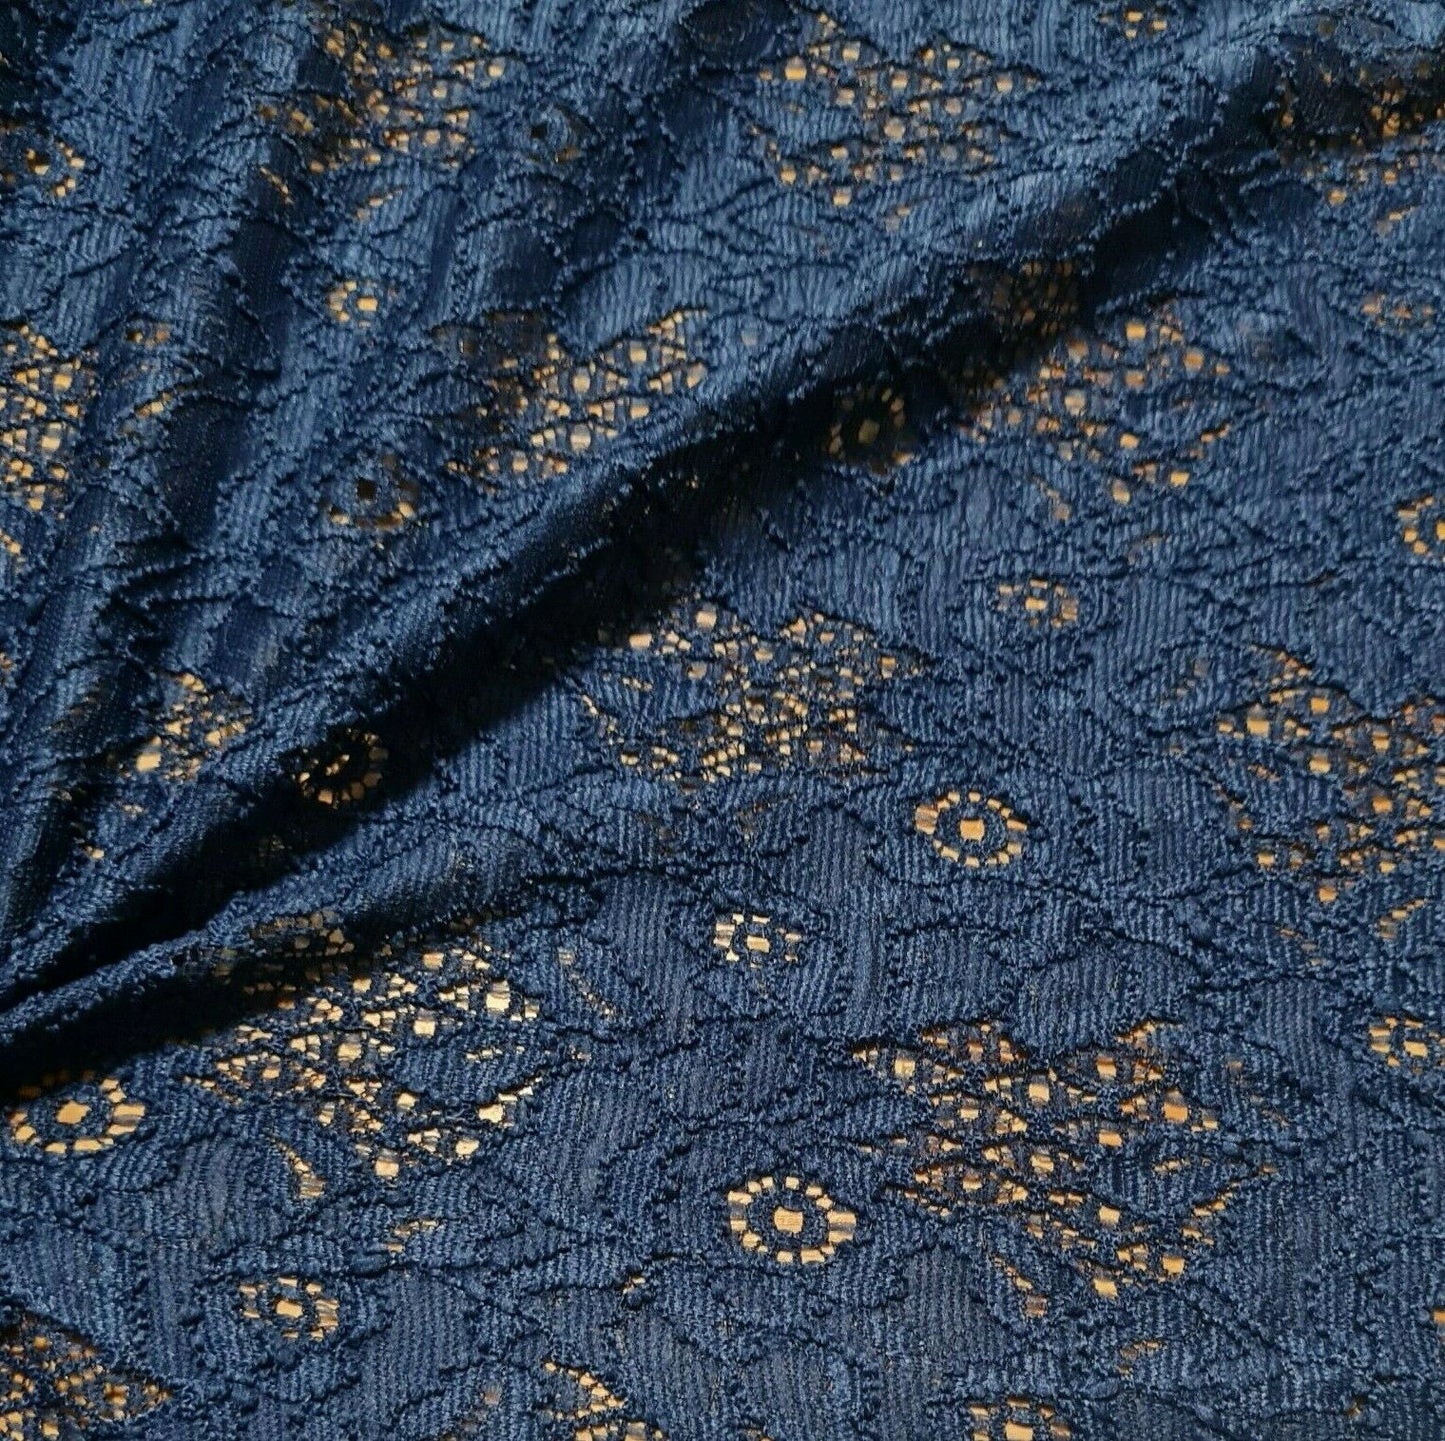 Stretch Lace Fabric Navy Floral Navy Colour Sold By The Metre